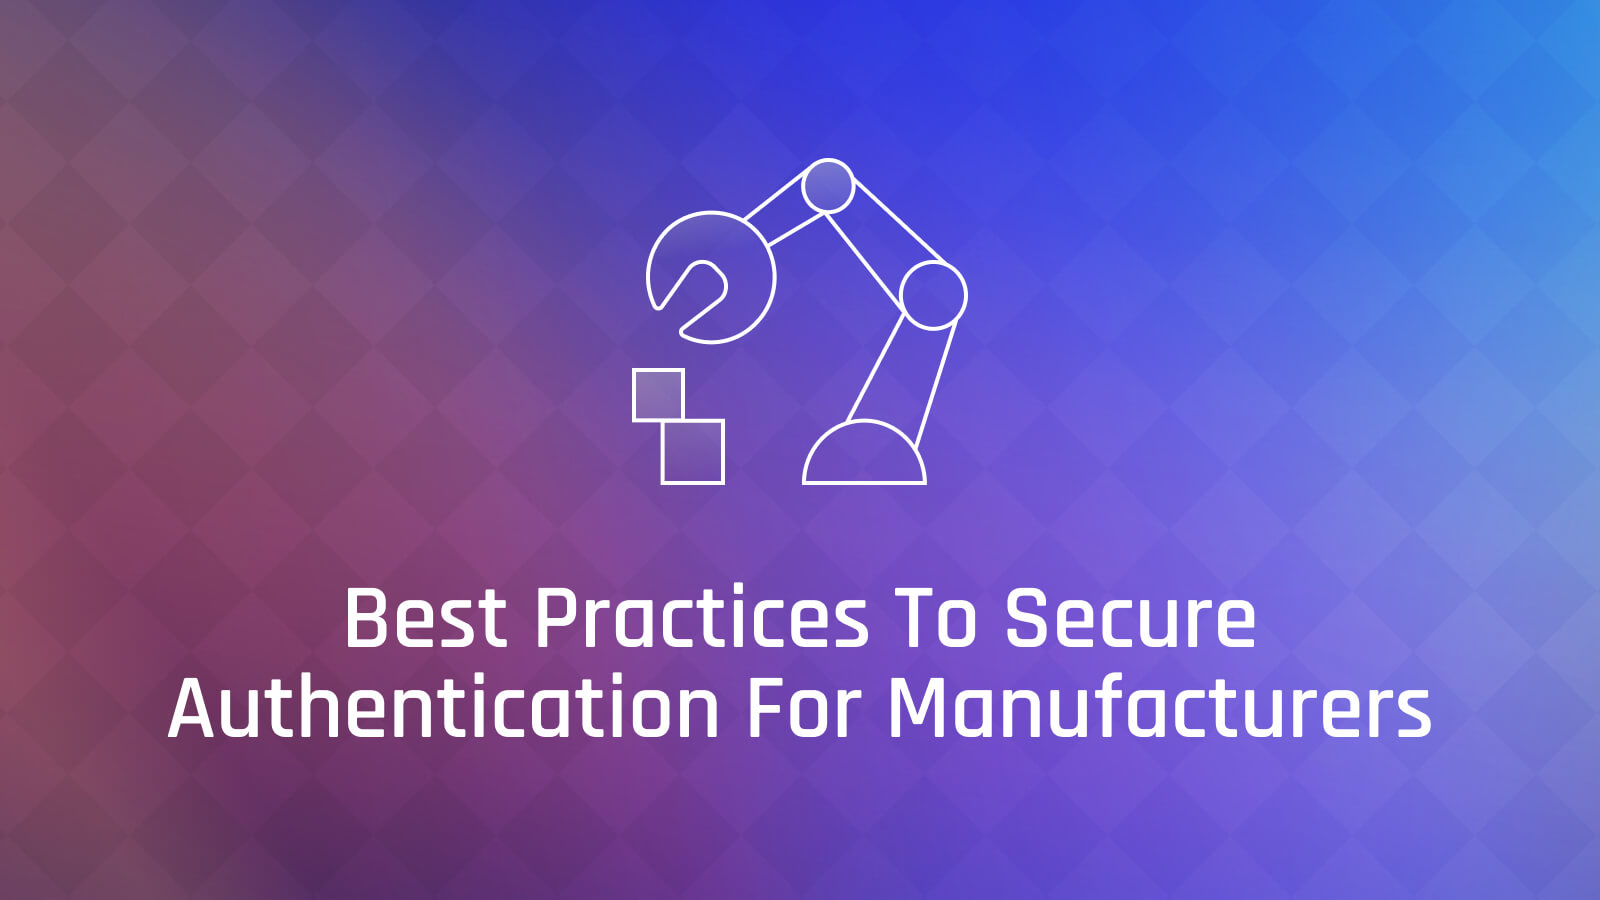 Best Practices for Authentication Security in Manufacturing